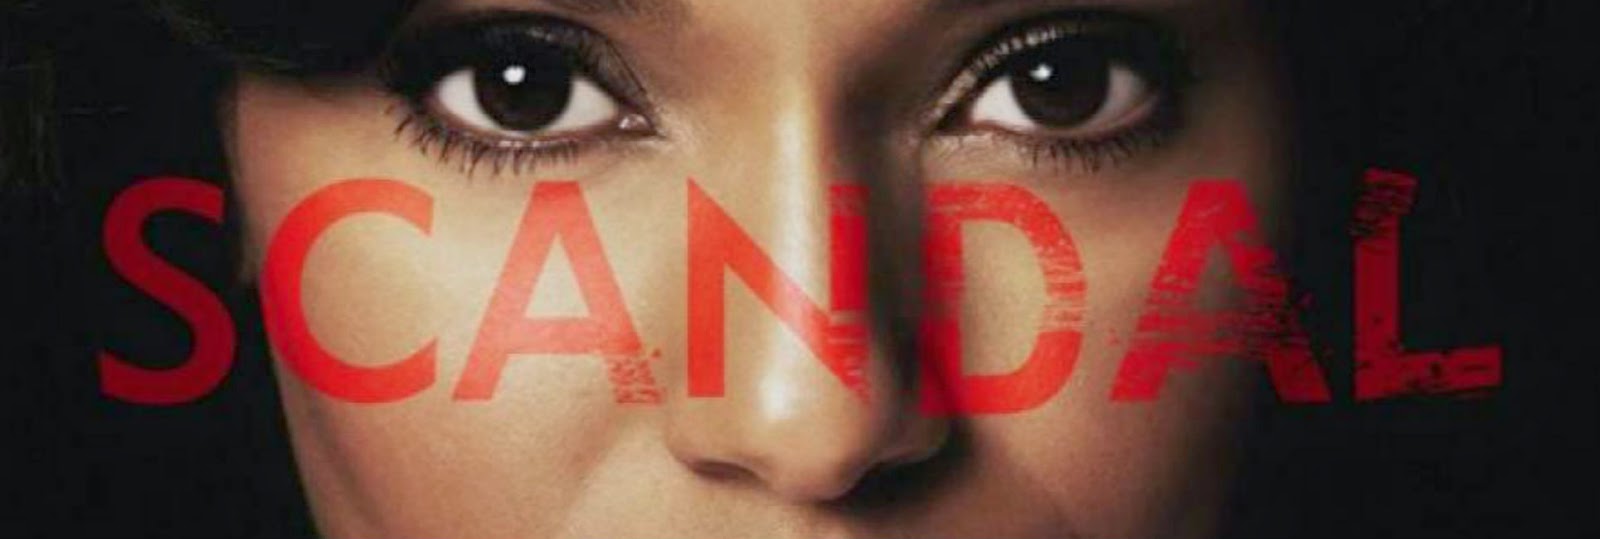 POLL : What was your Favourite Episode of Scandal this Season?